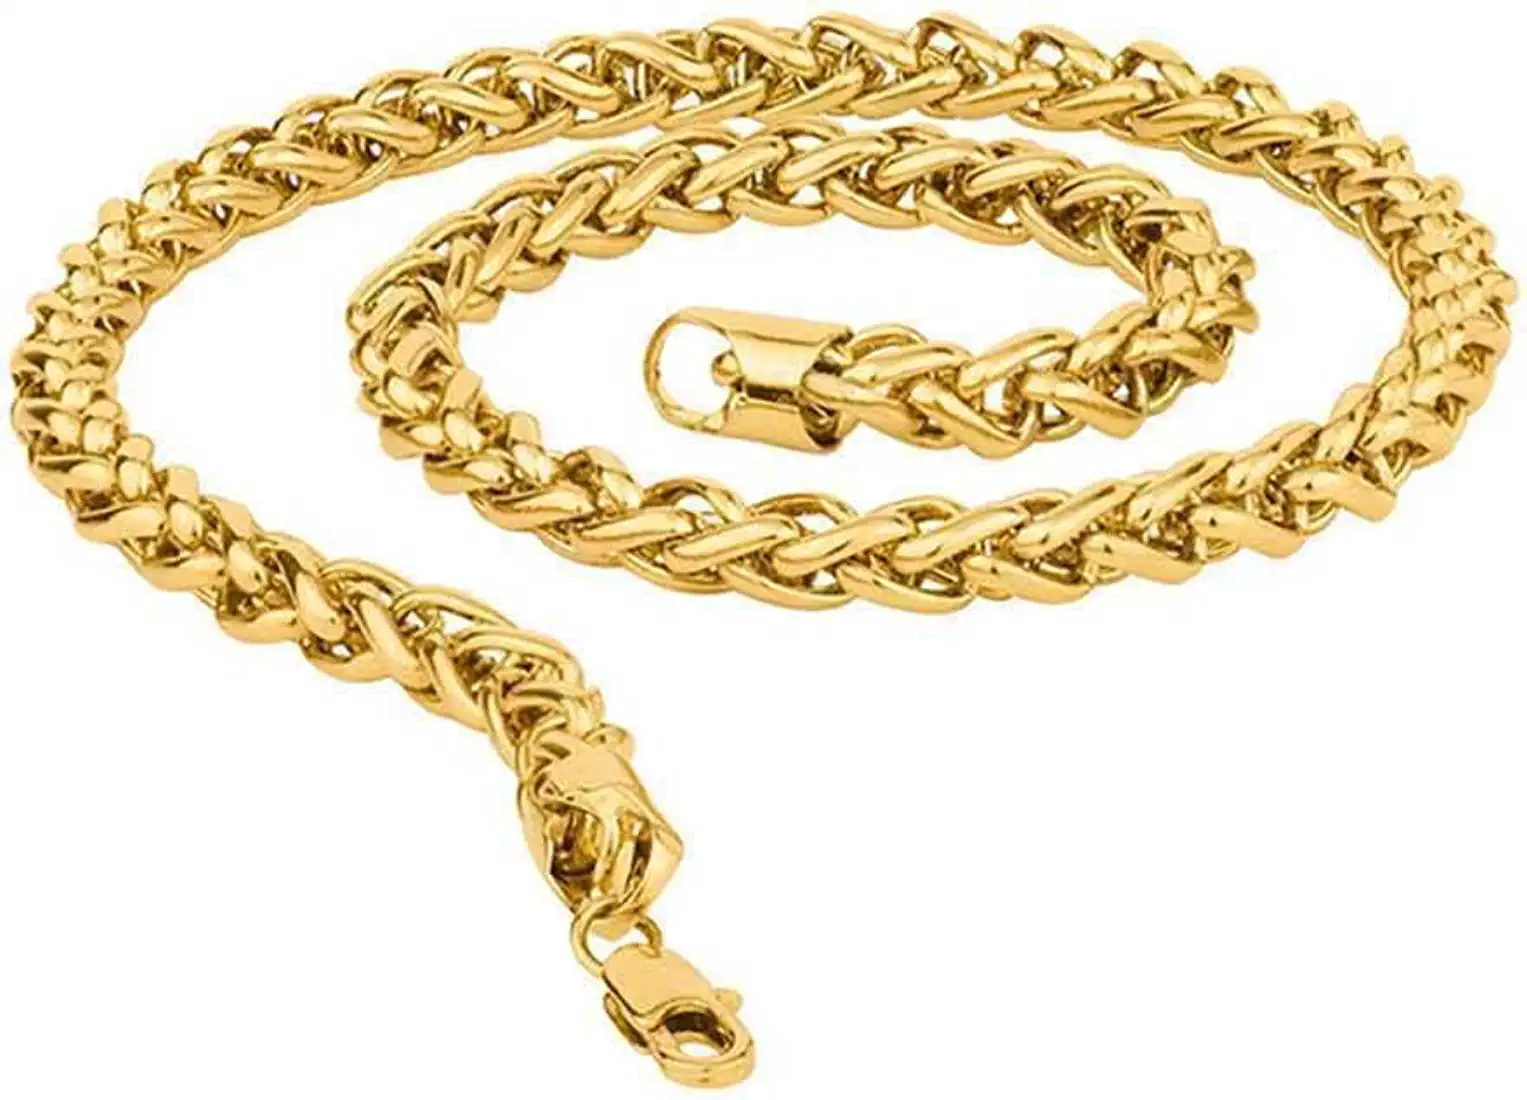 Brado Jewellery Gold Plated Stainless Steel Chain For Boys and Man